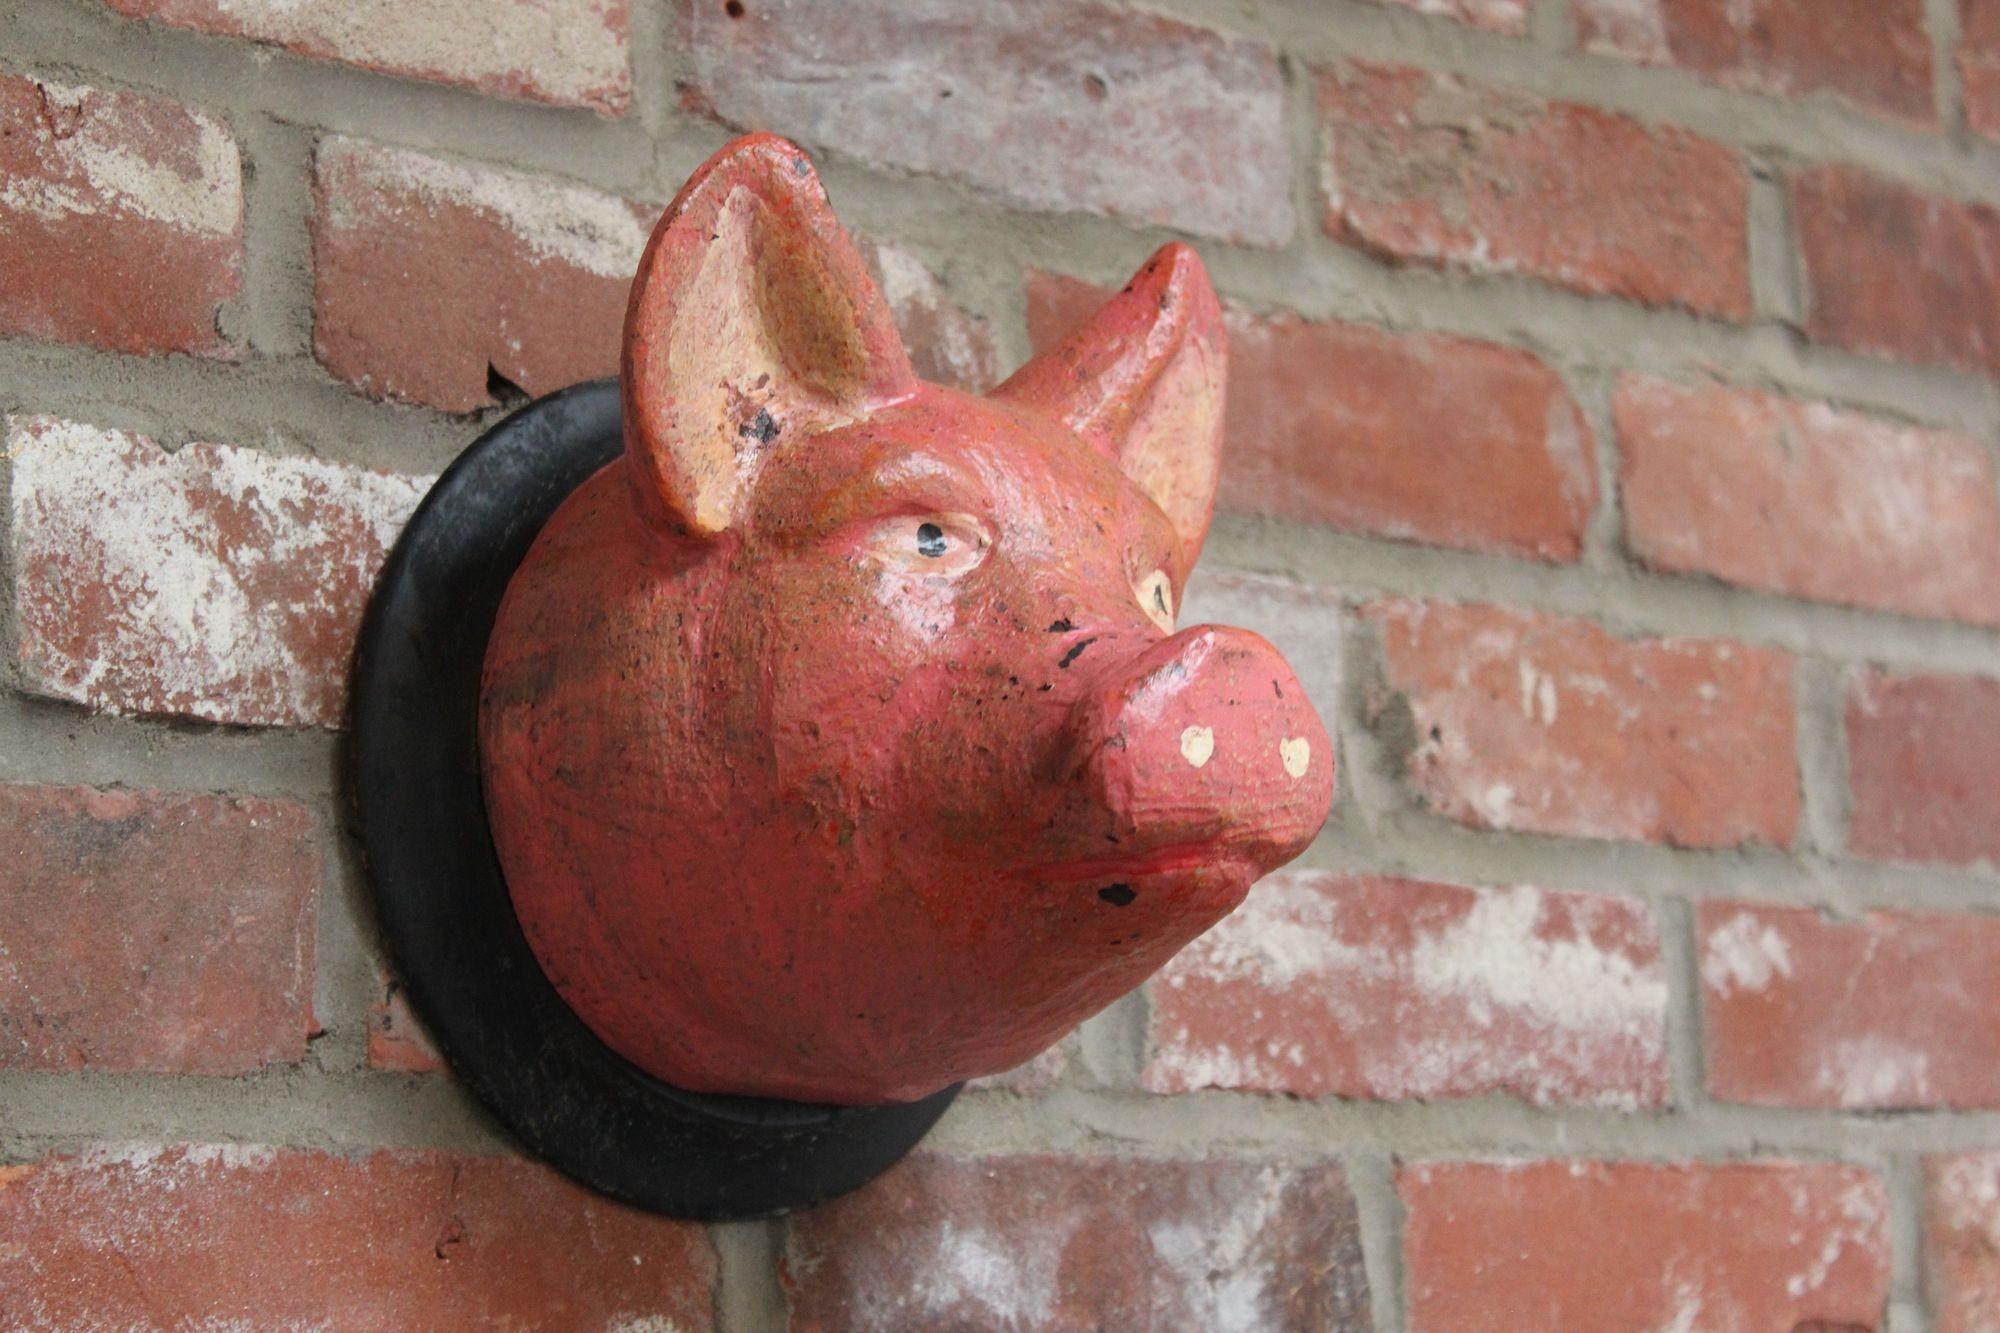 Black Forest carved and hand-painted 'pig' sculpture mounted to a circular board for wall hanging (ca. 1930s/40s, Germany).
Charming piece with all original paint with naturally aged patina/light wear consistent with age/use, as shown.
Relatively